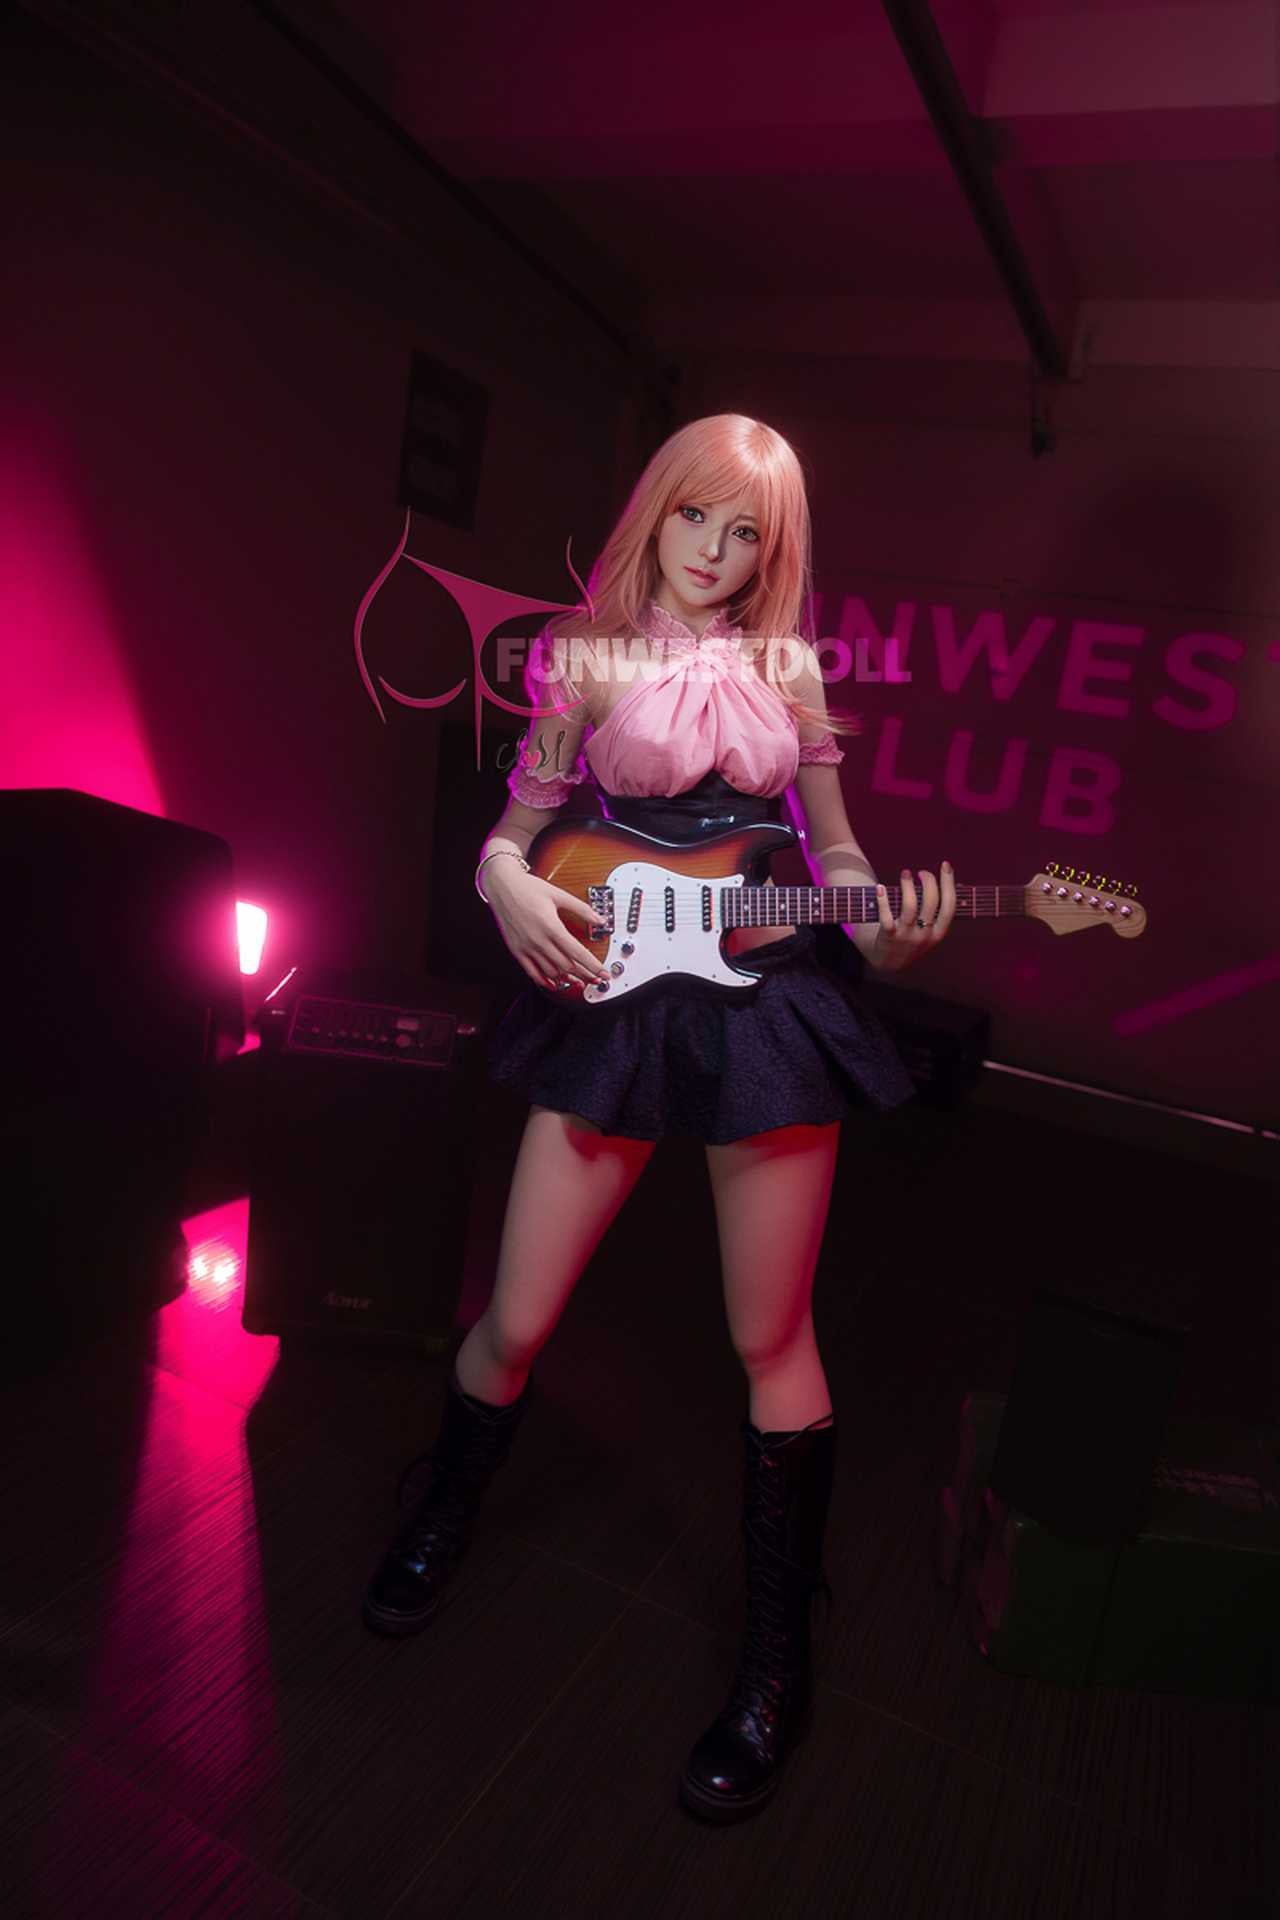 Funwest Pansy: 157cm Sexy Blonde Musician Doll with C-Cup Breasts